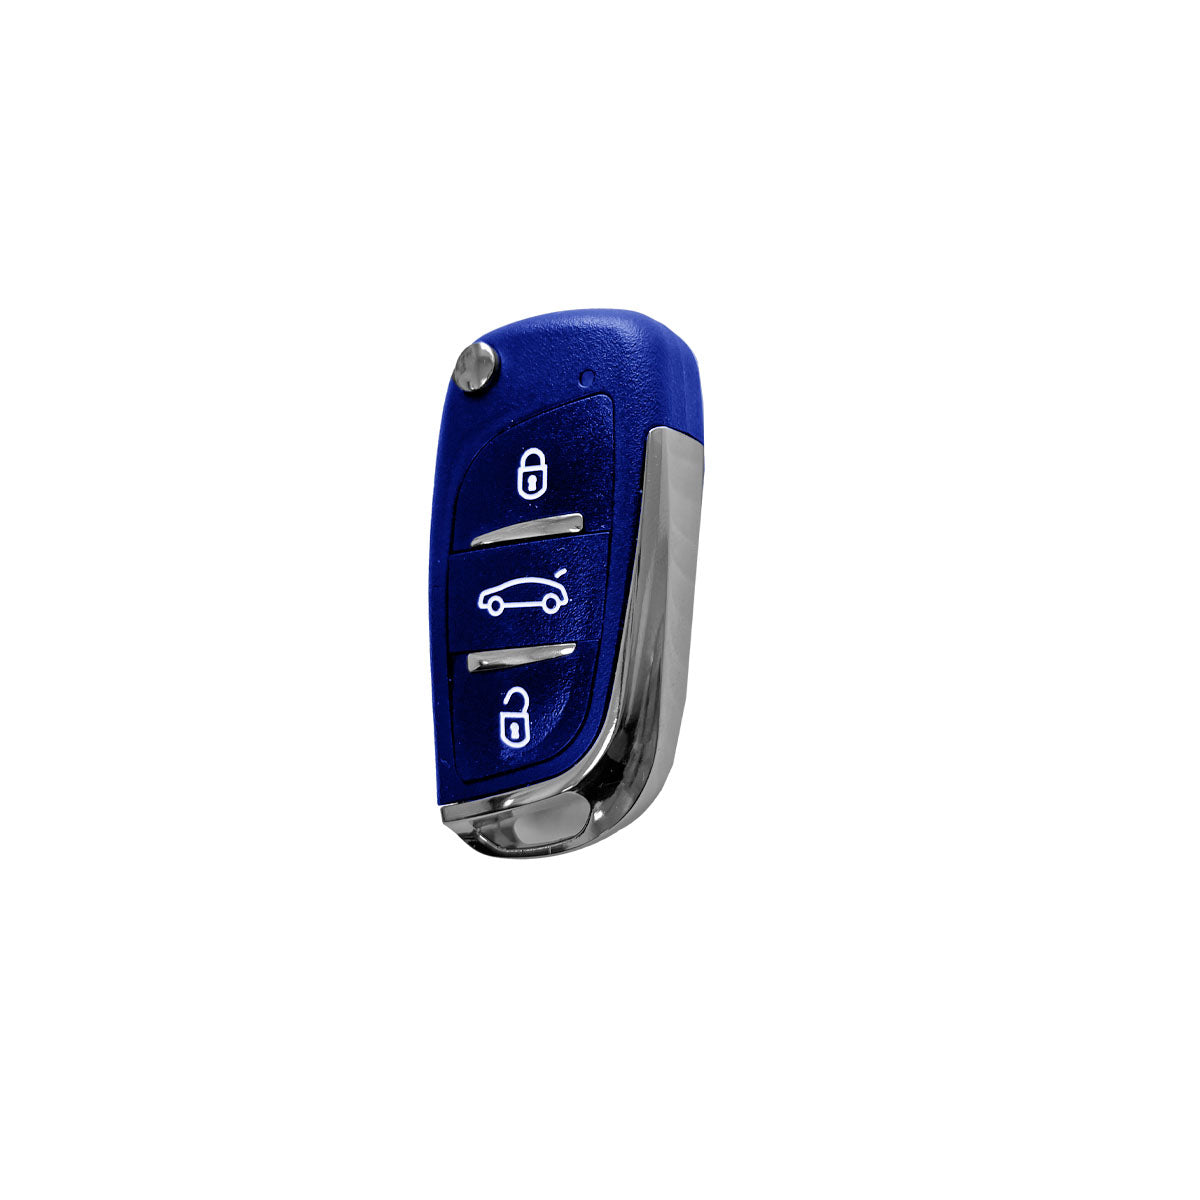 Poker Key Fob Playing Cards Scanner For Poker Analyzer Device